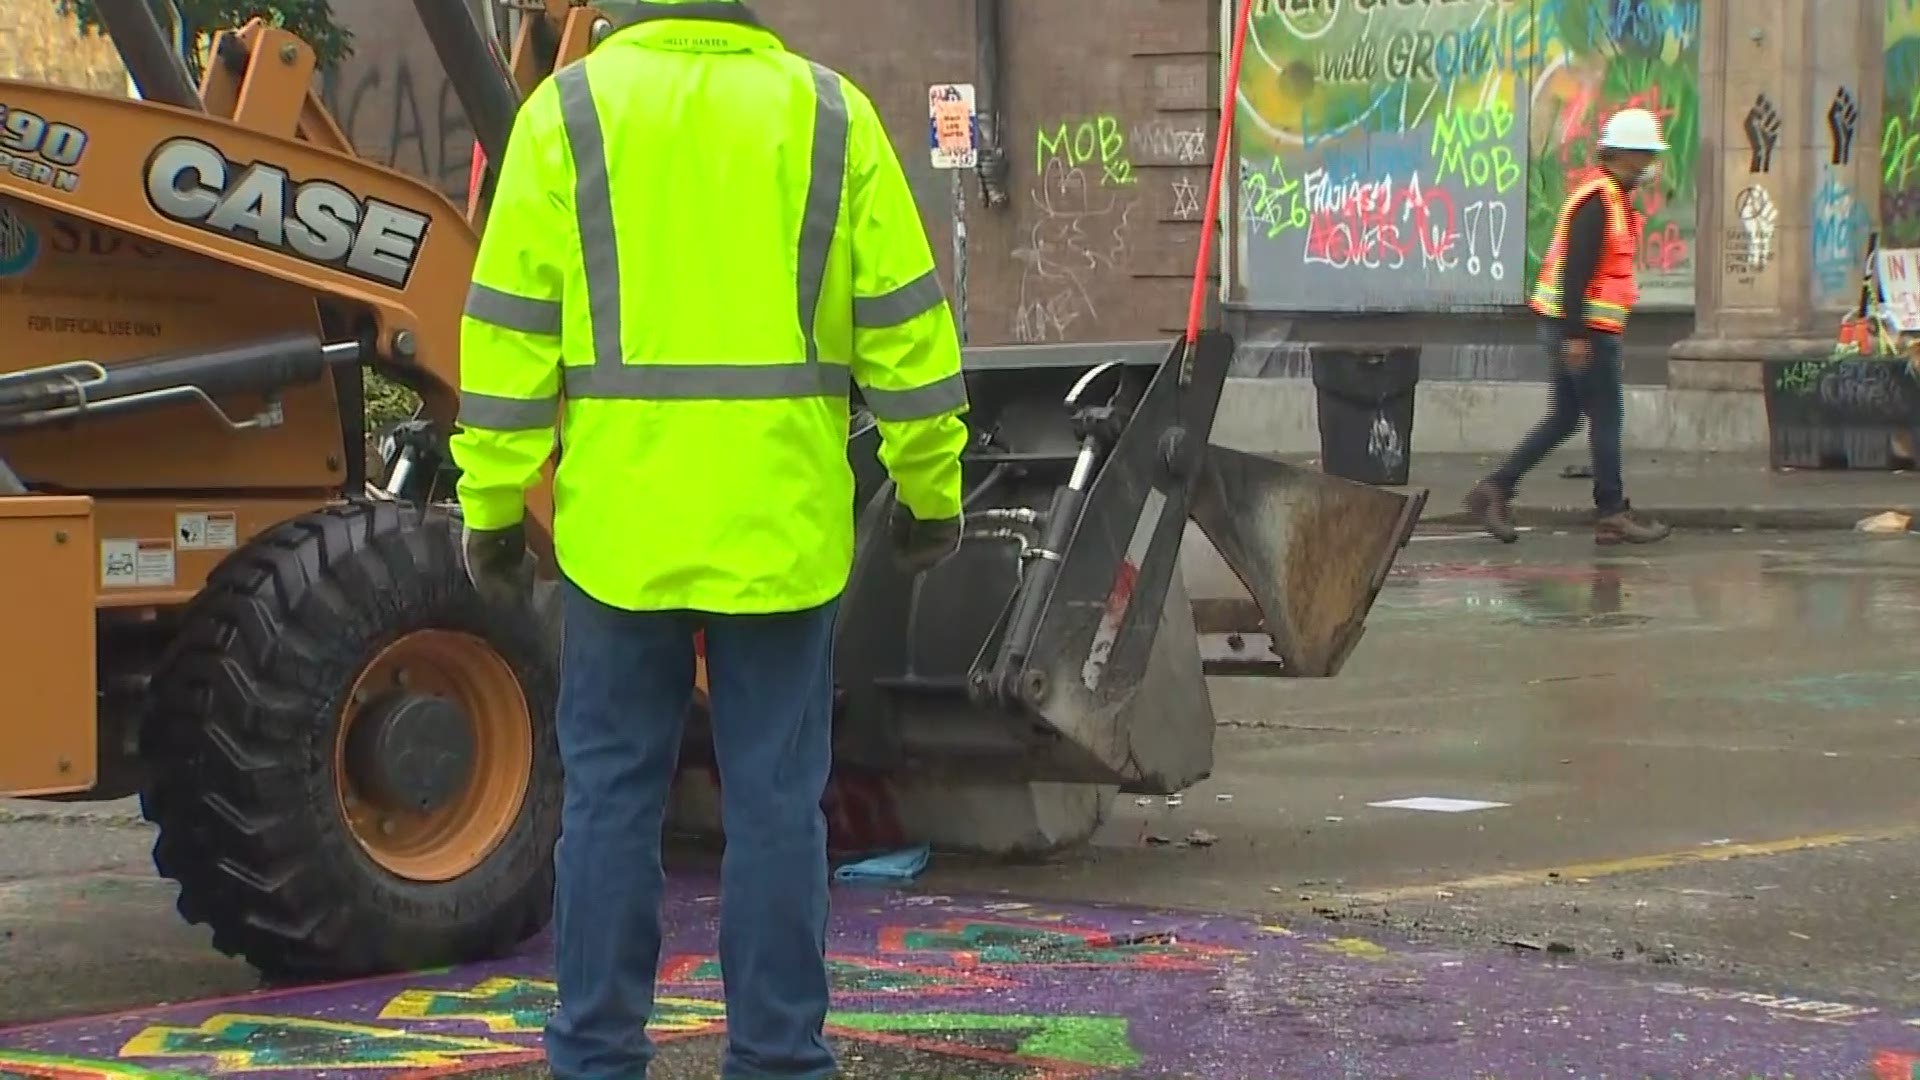 Seattle transportation crews began removing the barricades Tuesday morning.